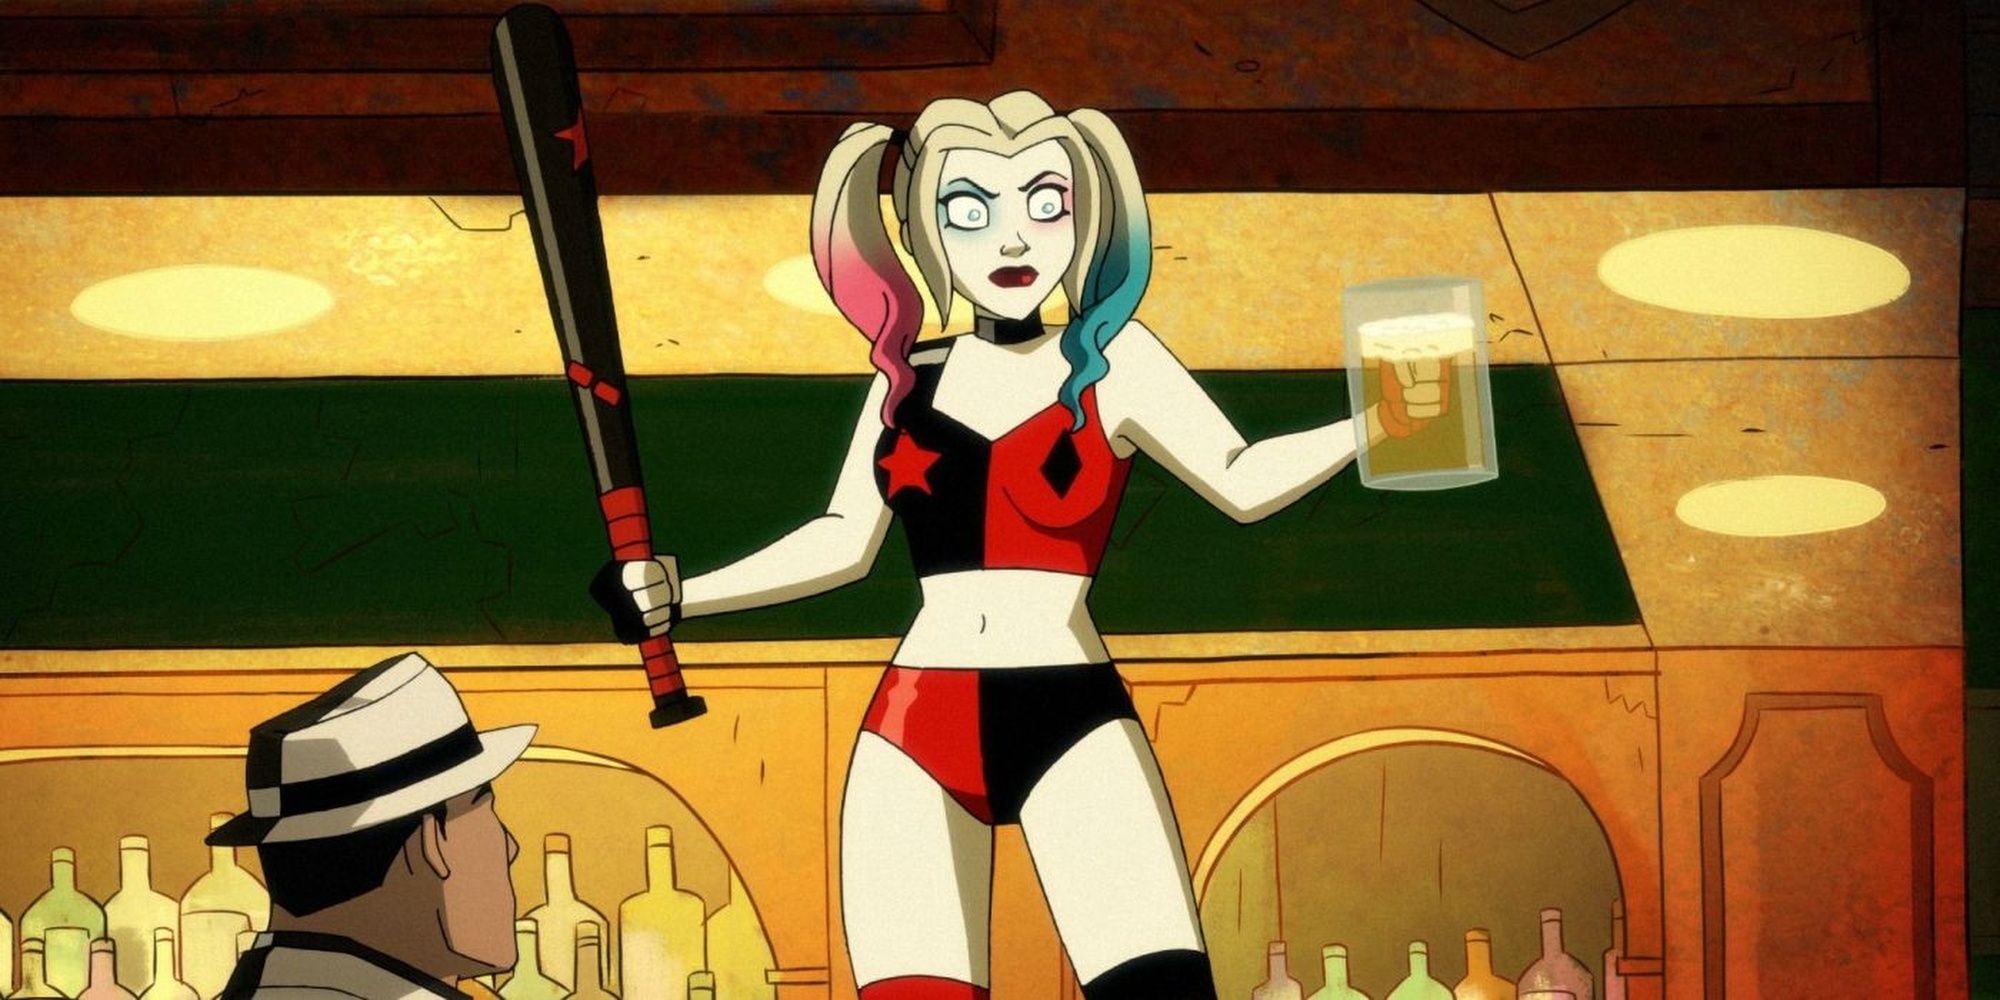 Harley Quinn brandishing her bat and a drink in a bar.